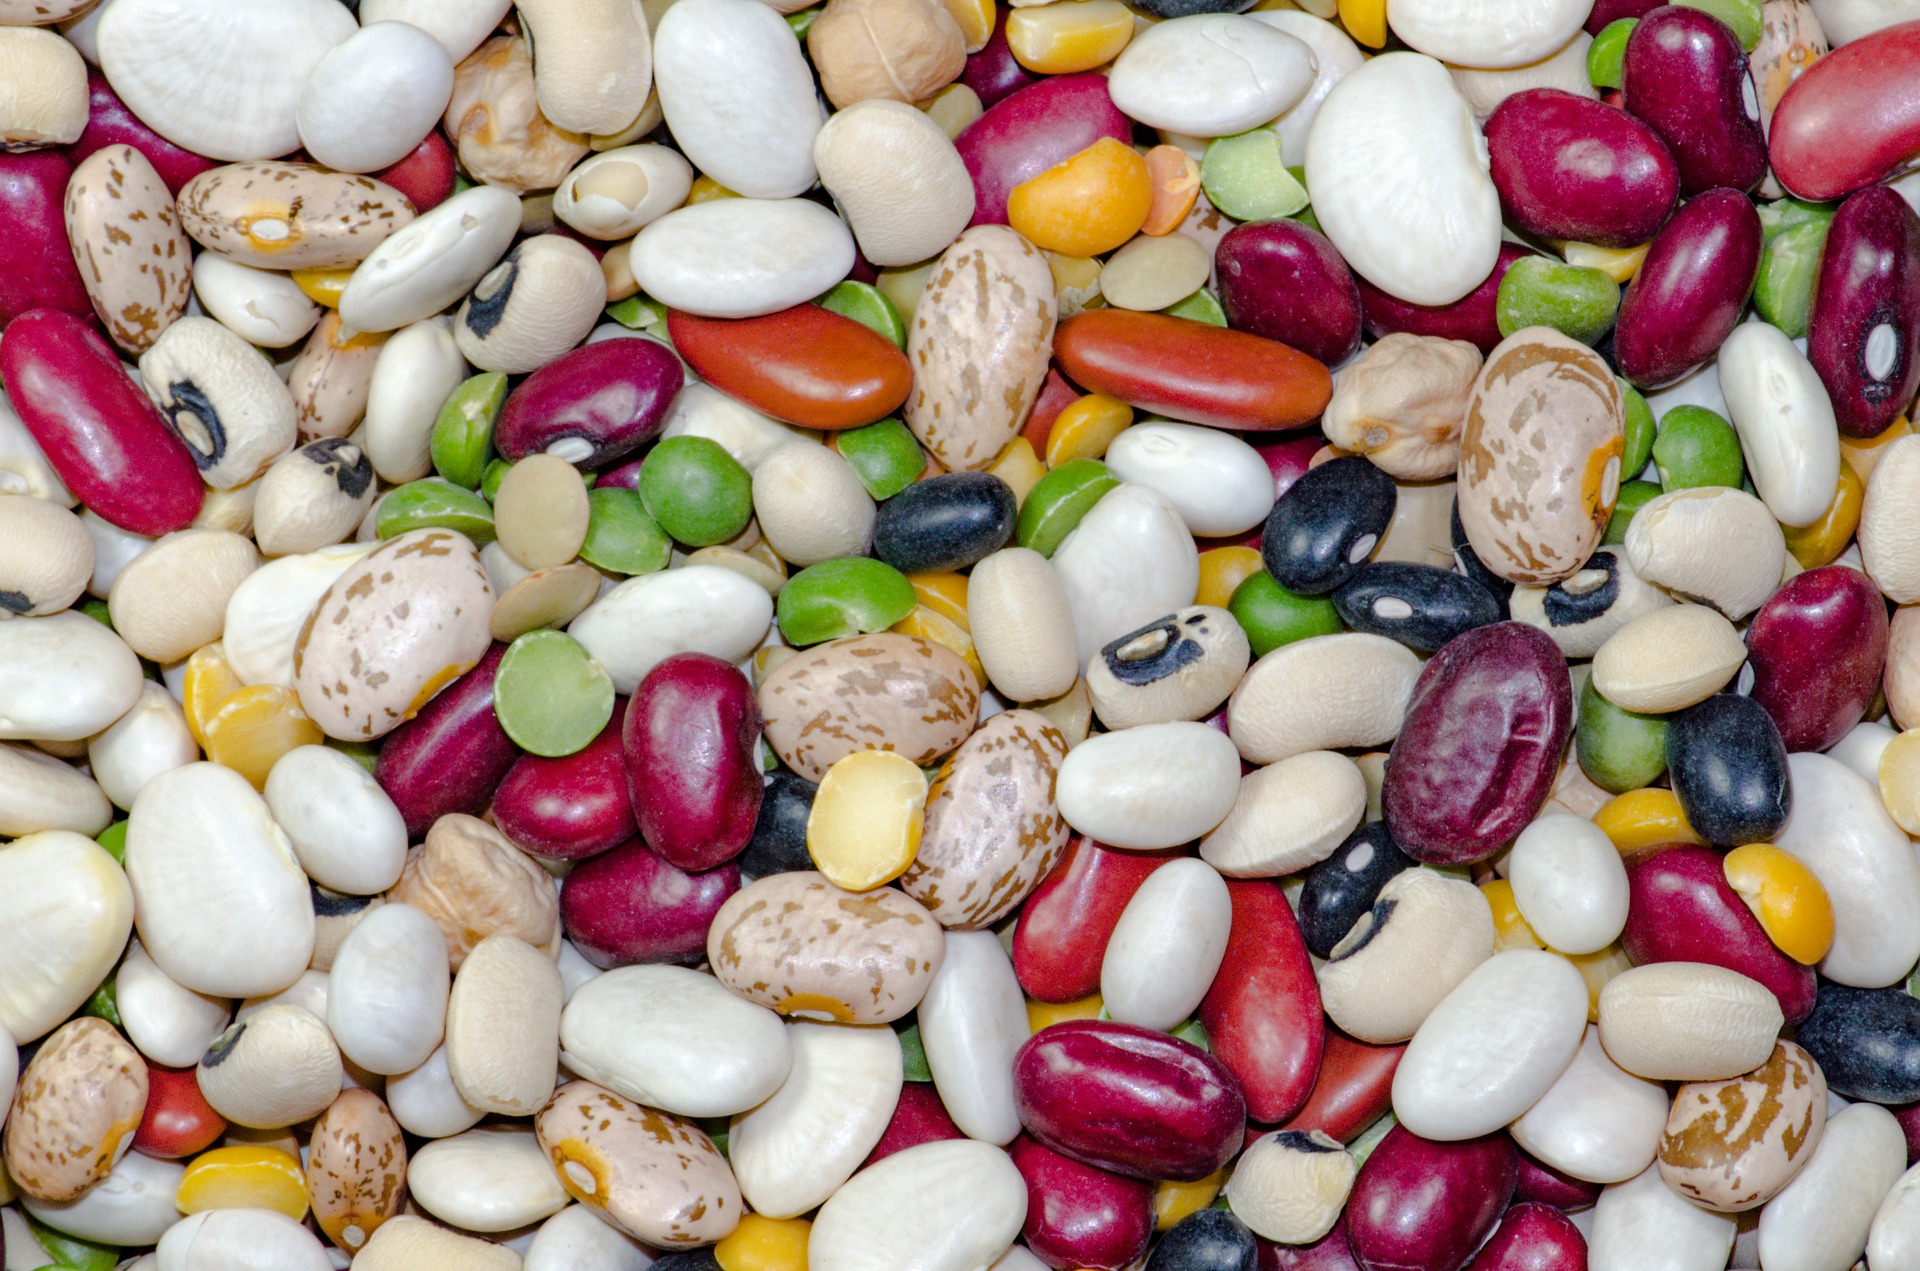 Variety of beans and pulses